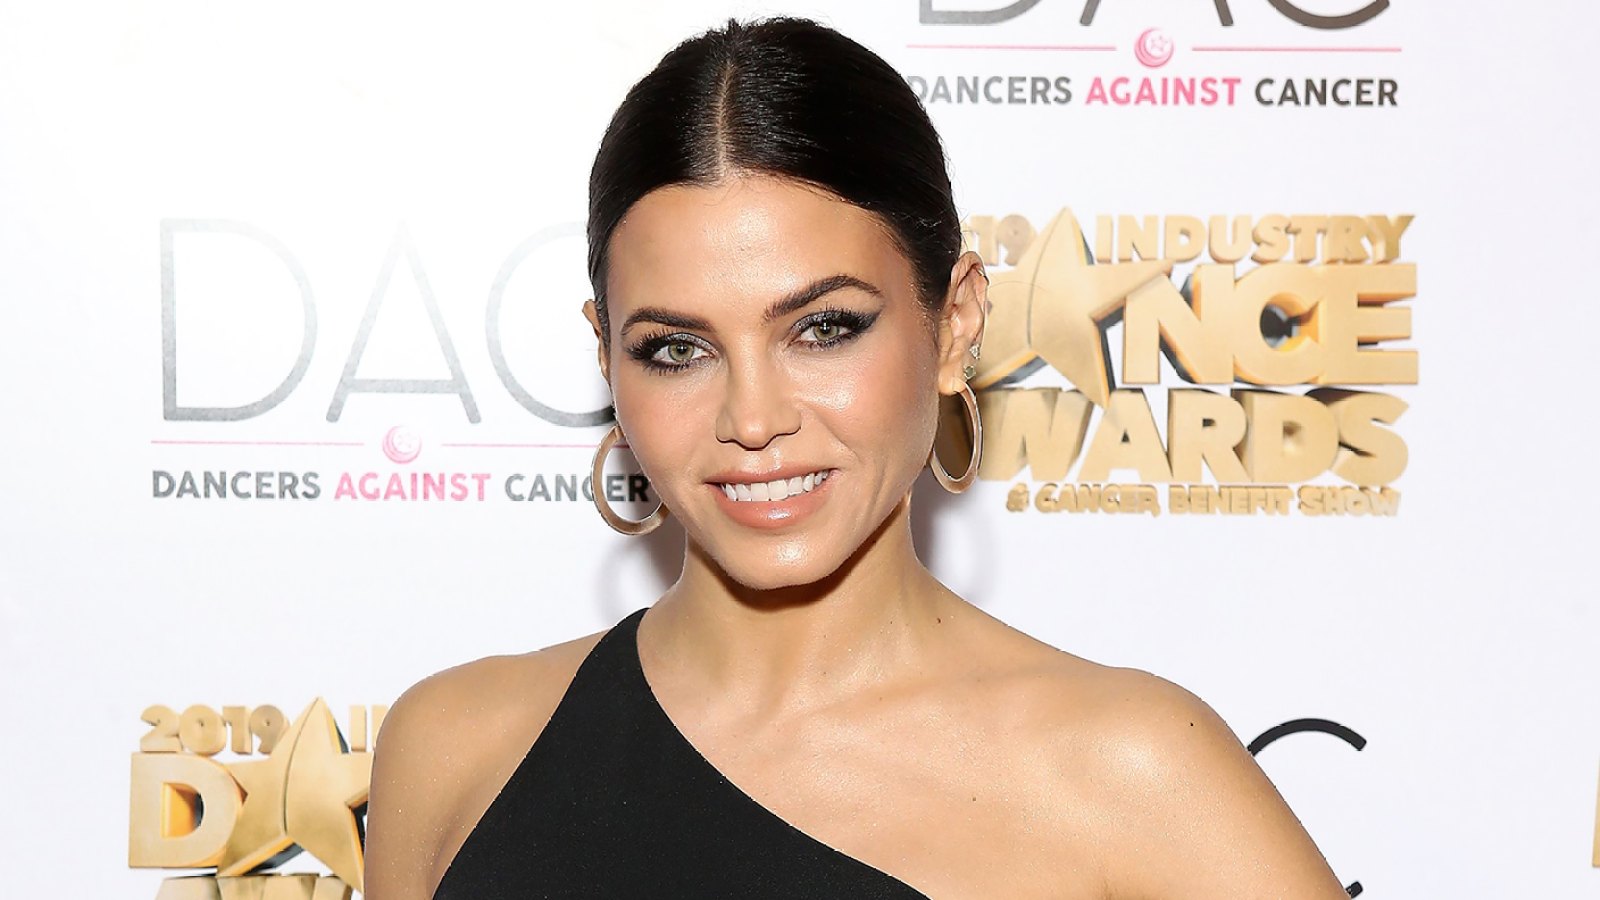 Jenna Dewan Explains Her 80/20 Diet: 'I've Gotta Be Able to Indulge and Have a Glass of Wine’